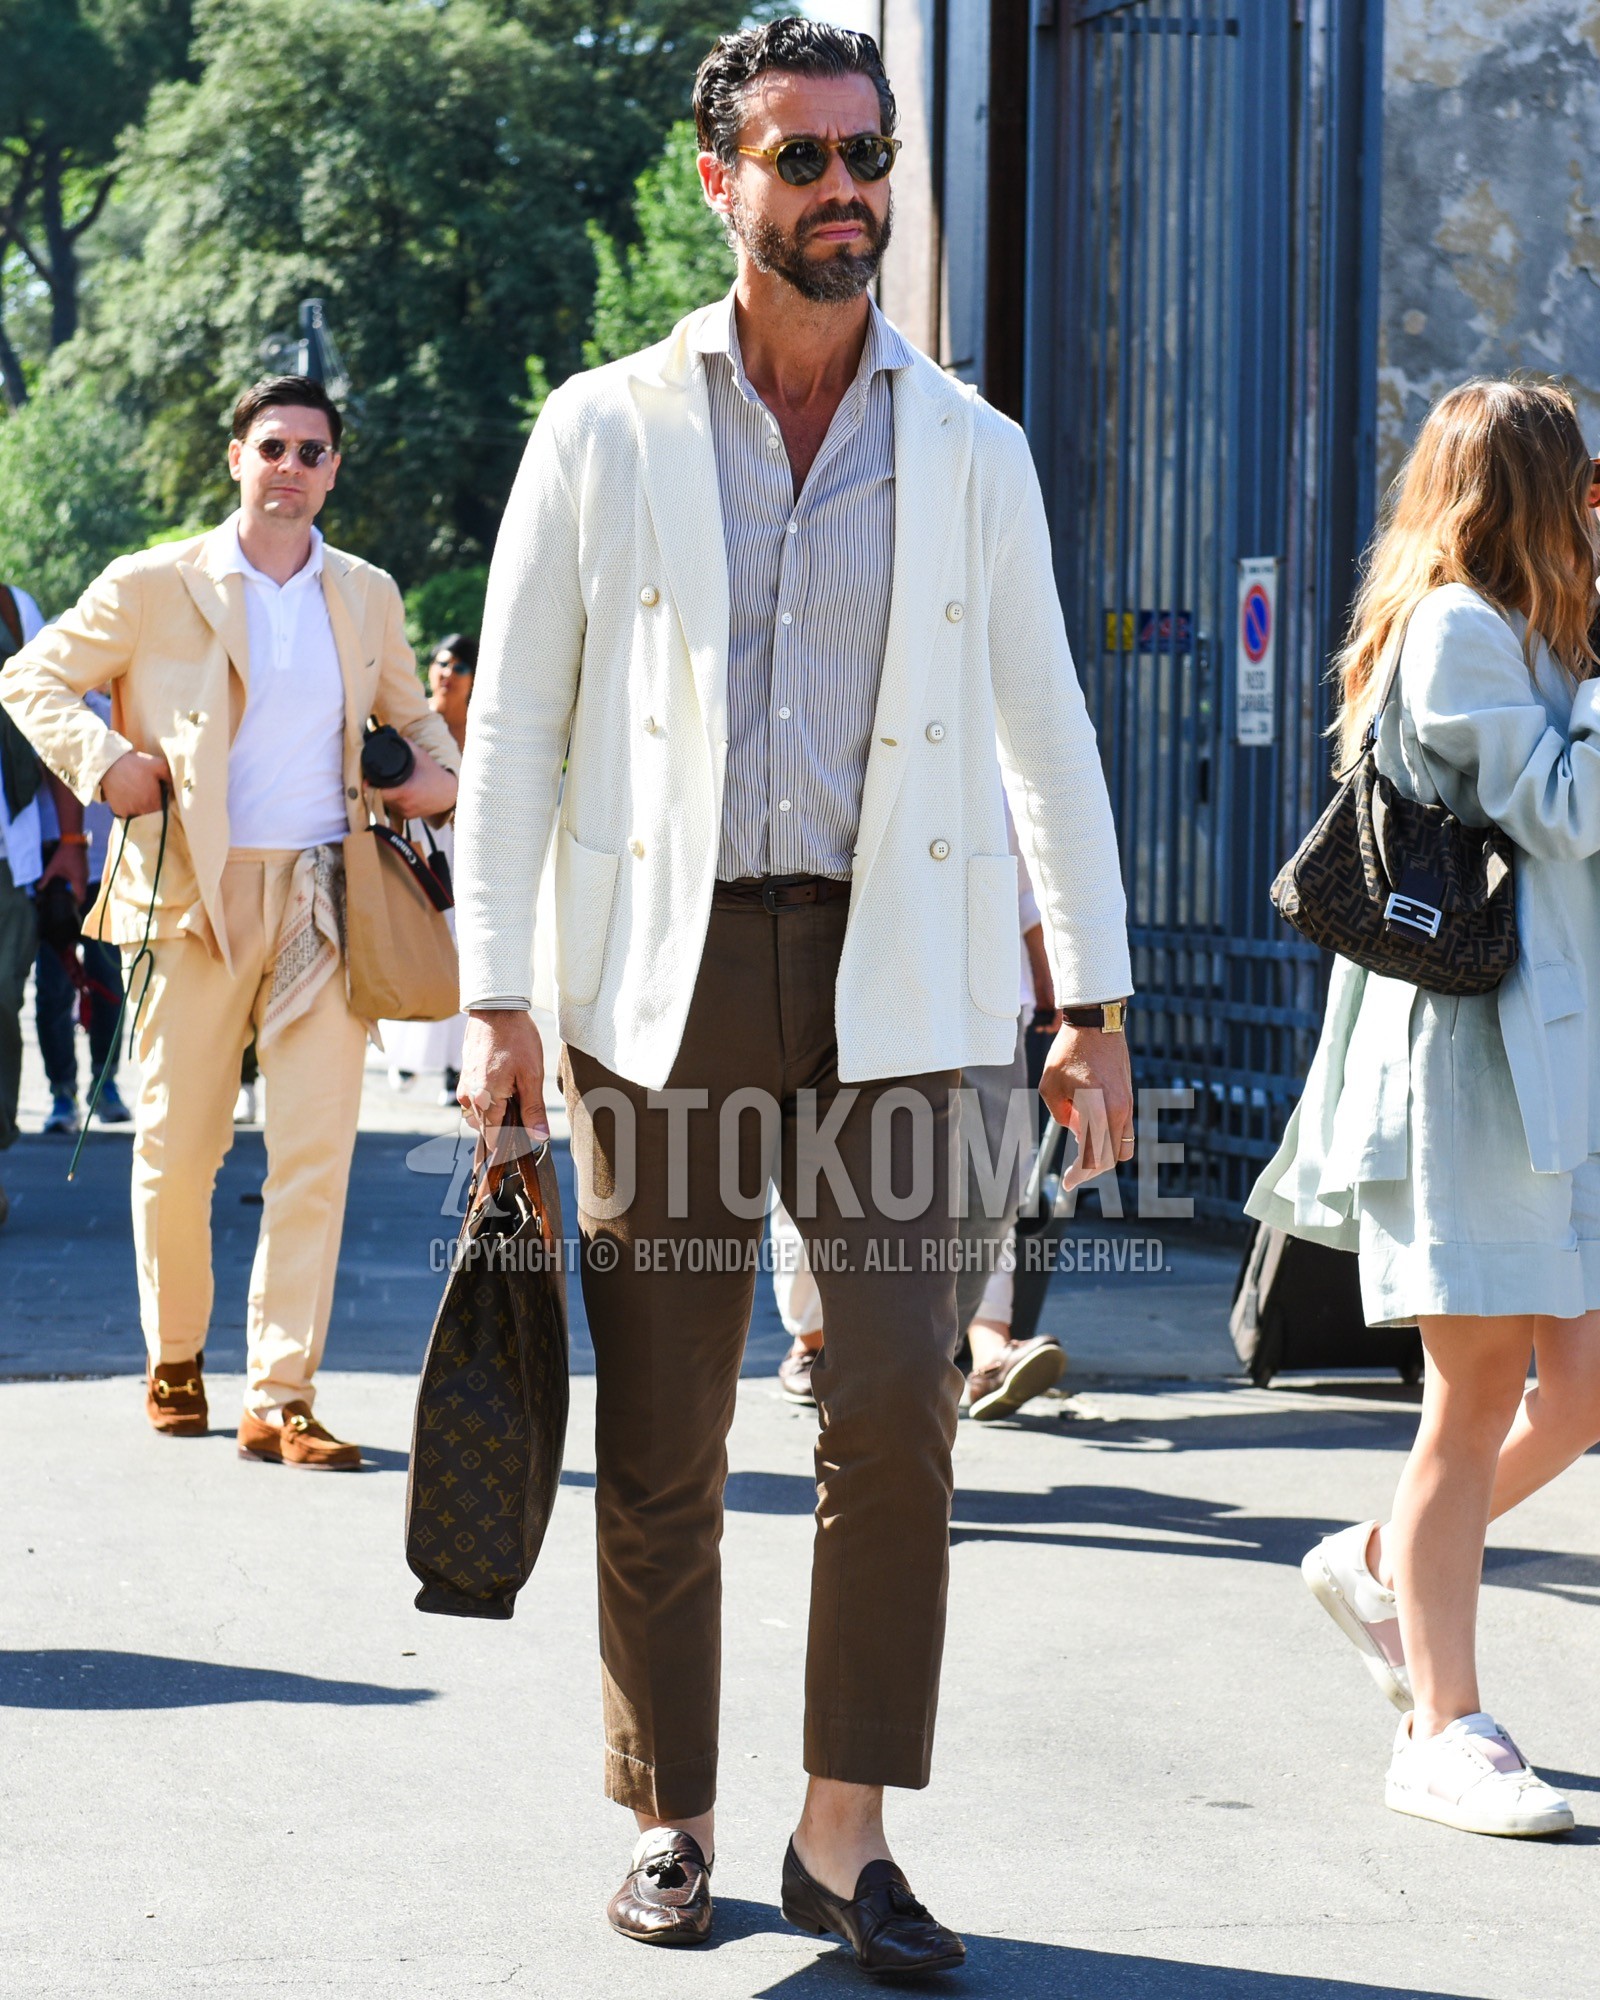 Men's spring summer outfit with brown tortoiseshell sunglasses, white plain tailored jacket, blue stripes shirt, brown plain leather belt, brown plain slacks, brown plain cropped pants, brown tassel loafers leather shoes, brown check briefcase/handbag.